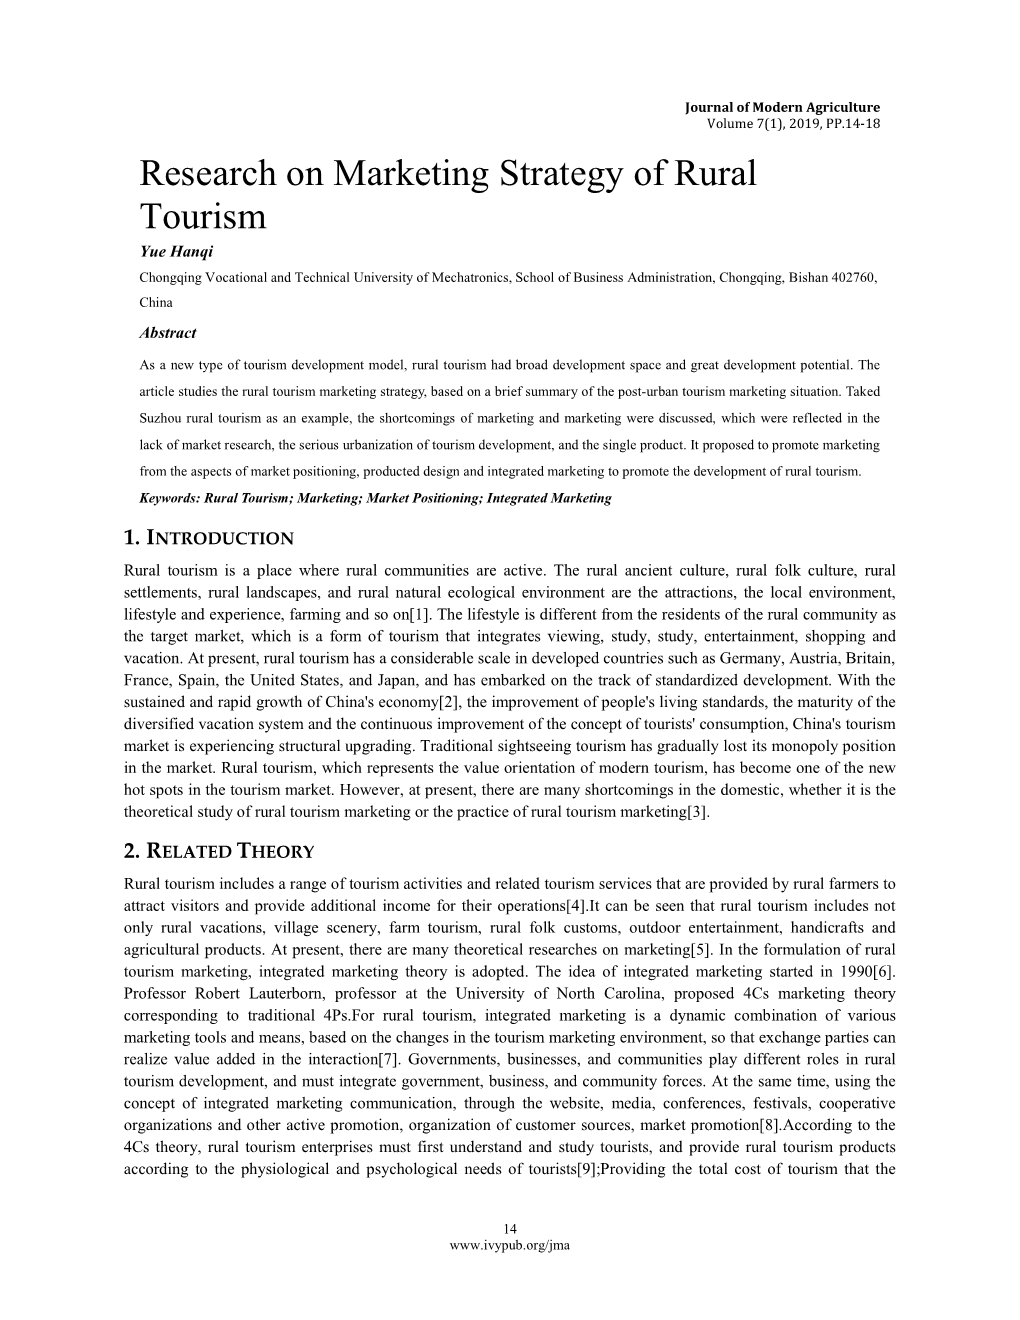 Research on Marketing Strategy of Rural Tourism